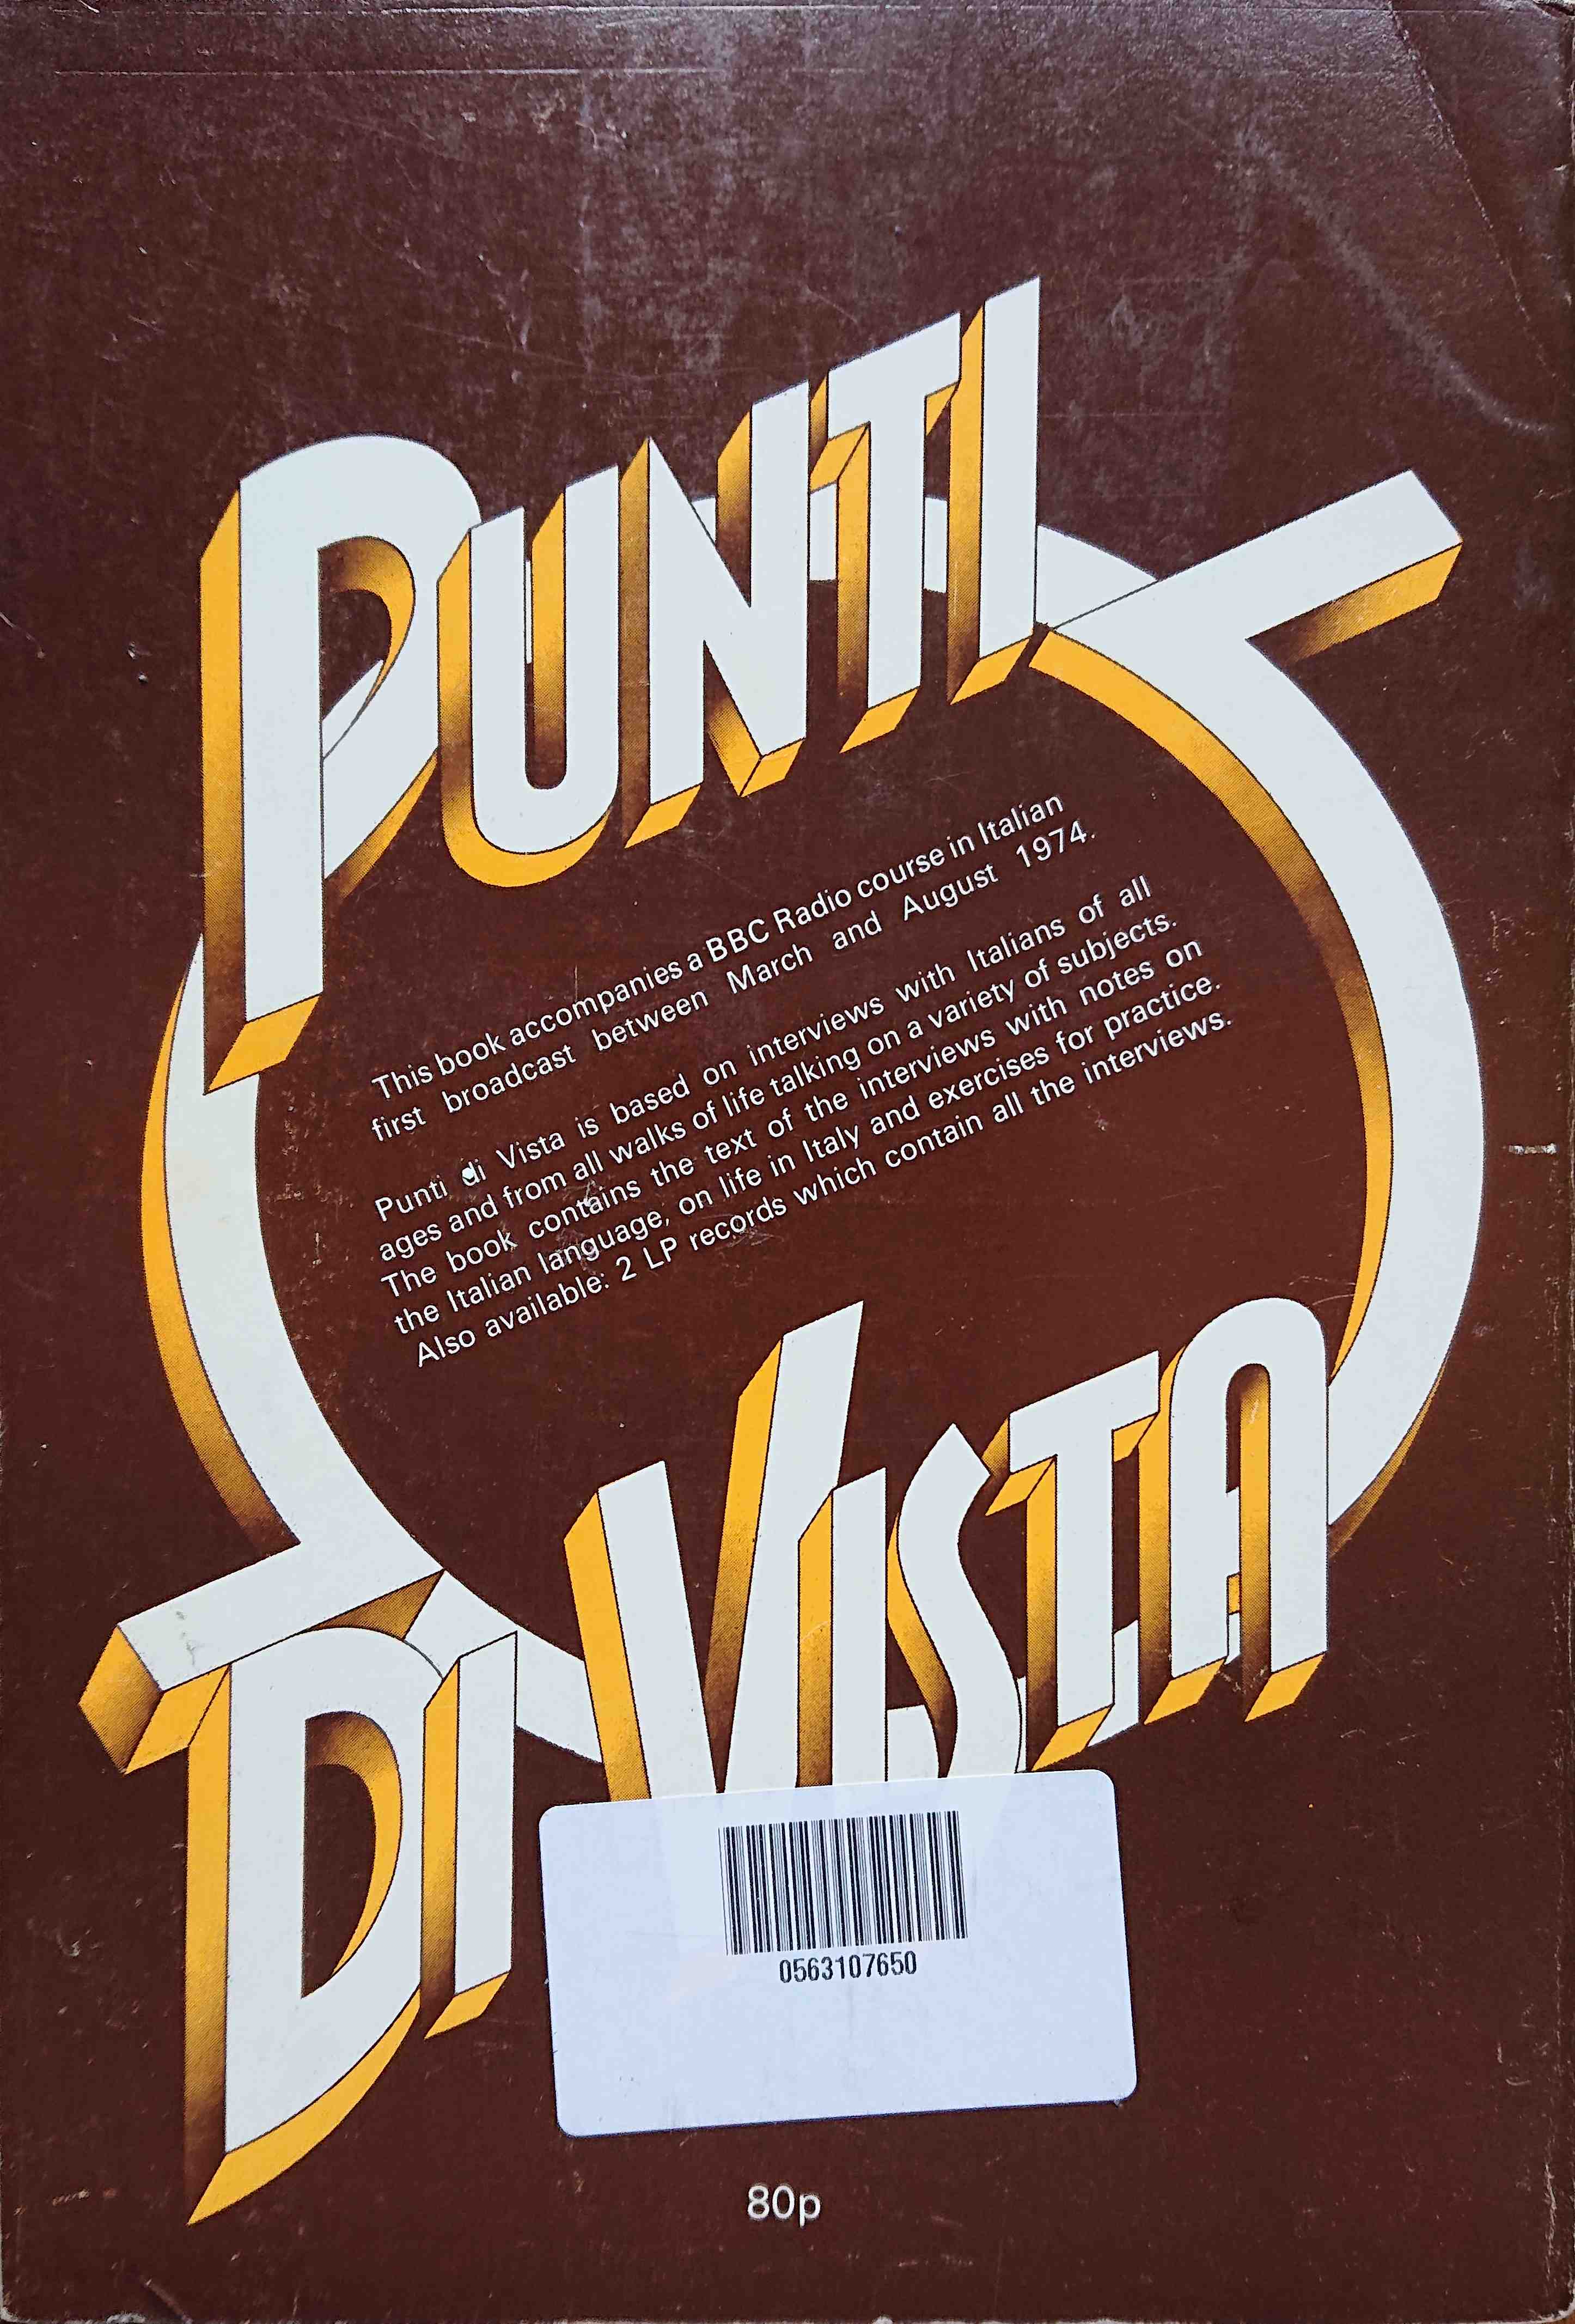 Picture of ISBN 0 563 10765 0 Punti di vista by artist John Insole from the BBC records and Tapes library